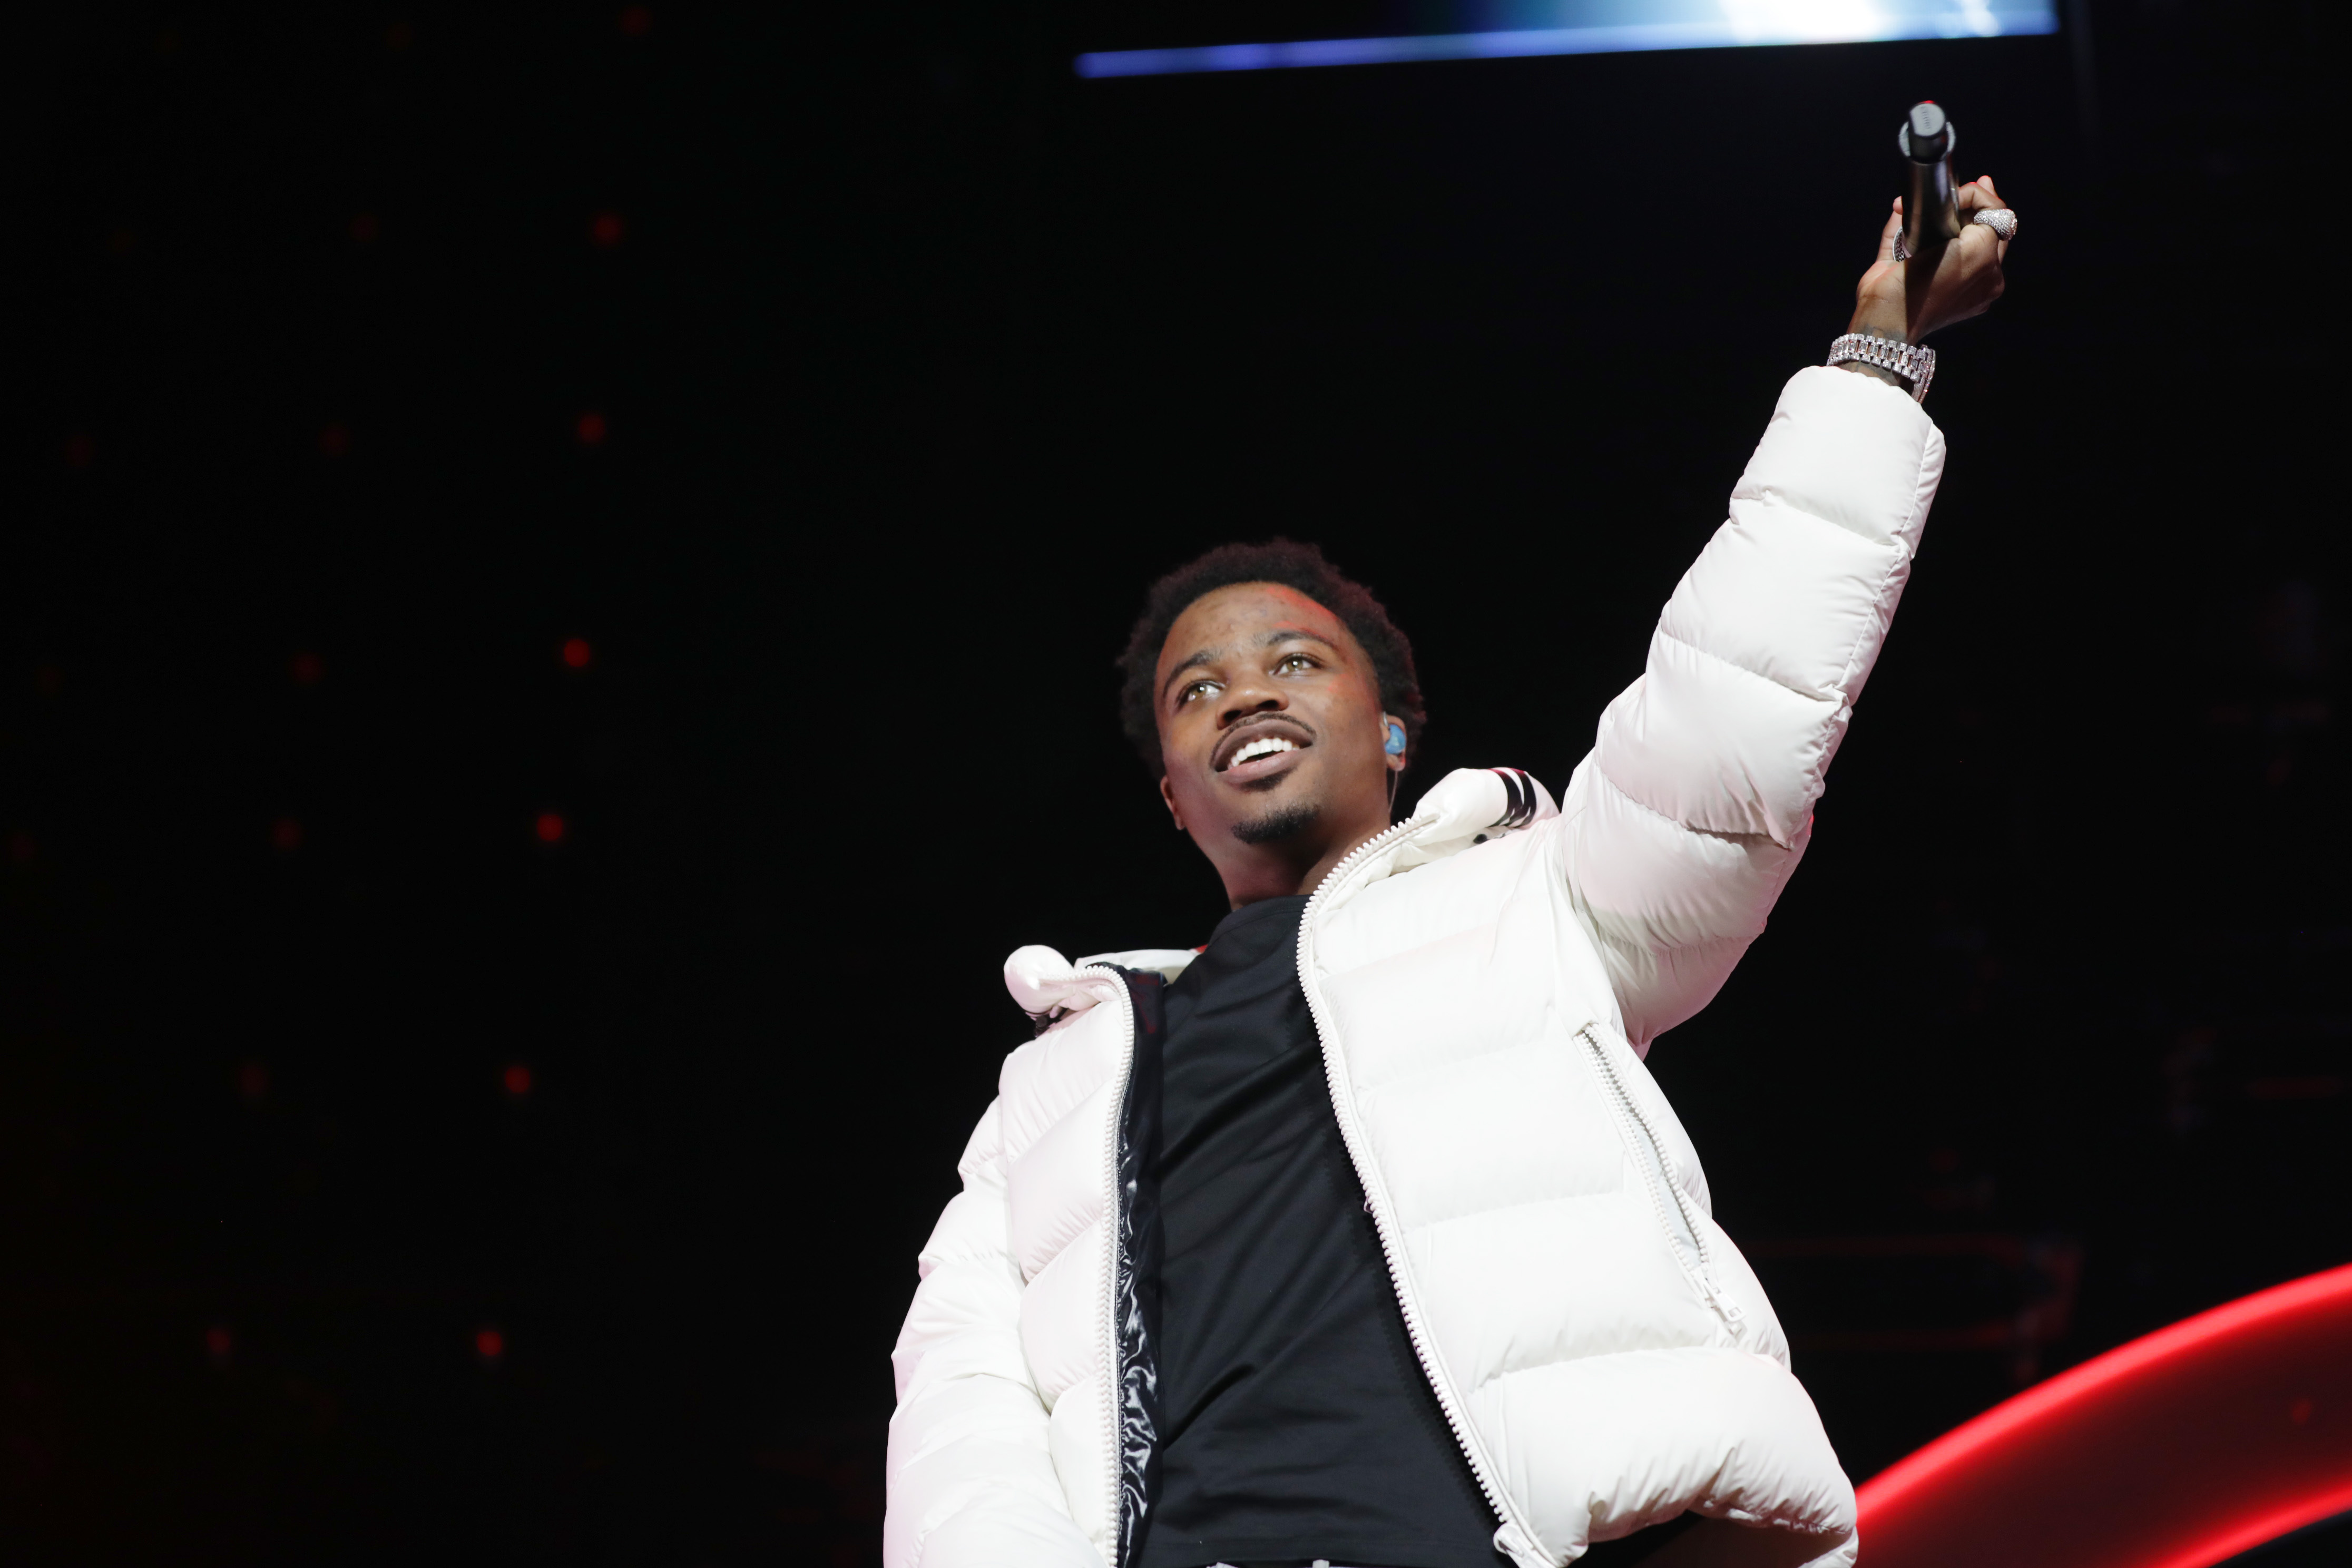 Roddy Ricch Teases New Music: “Let The Work Speak All 2021”